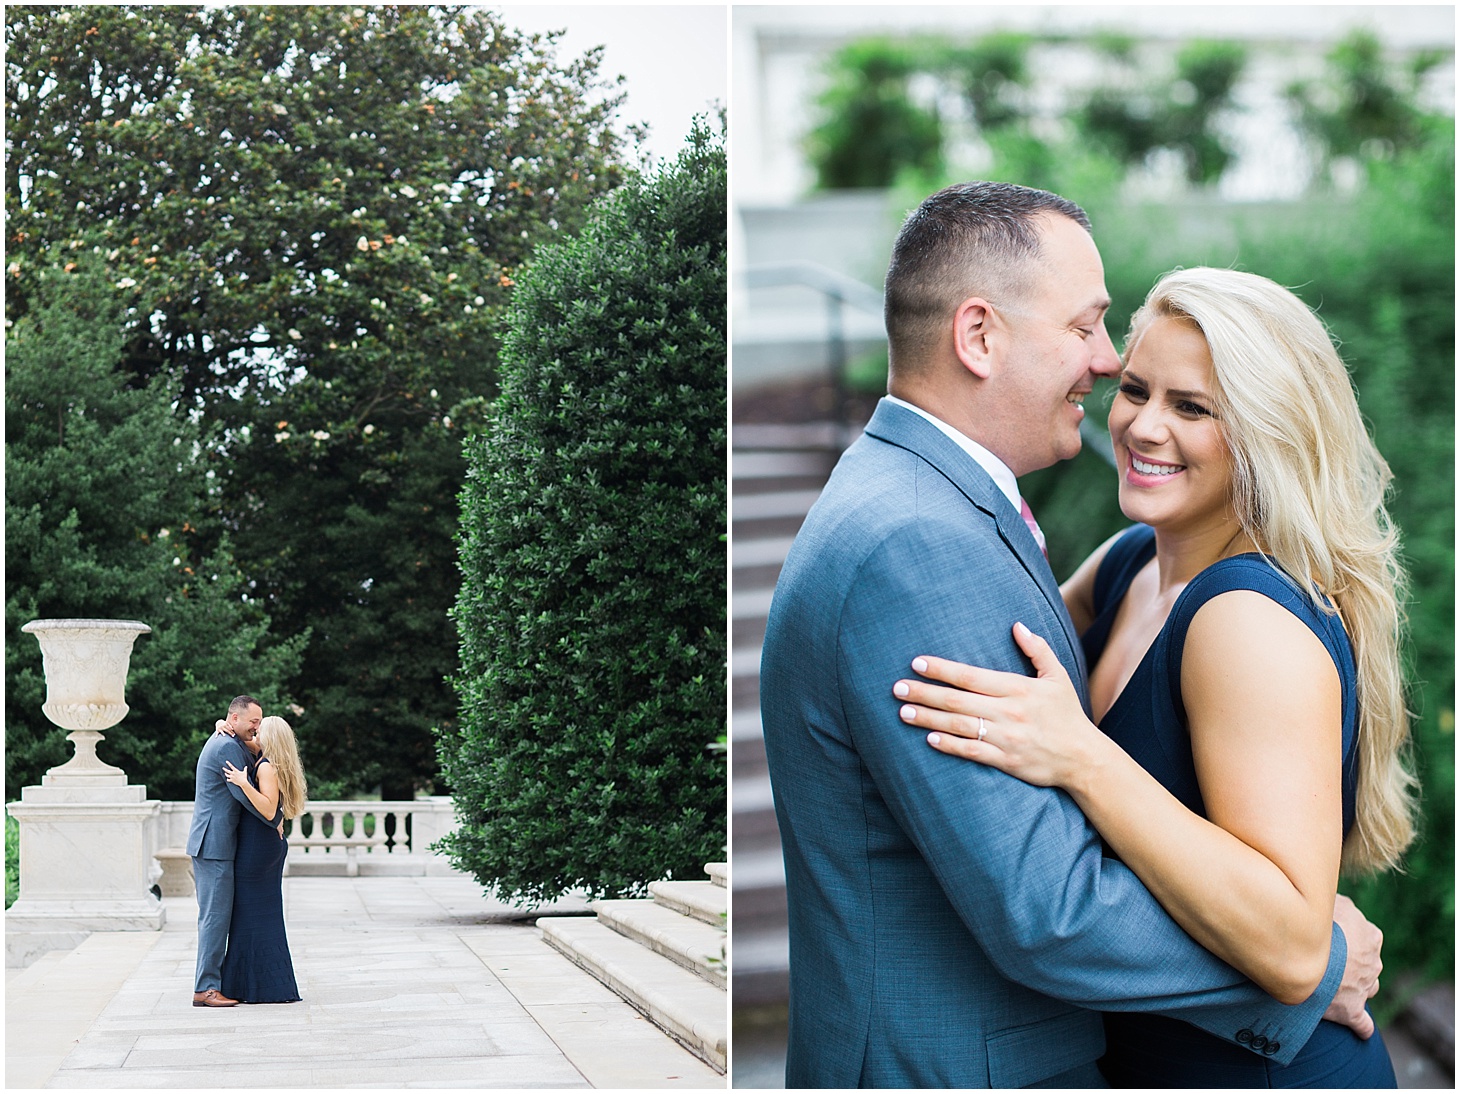 romantic-engagement-shoot-around-the-beautiful-d-c-monuments-by-sarah-bradshaw-photography_0018